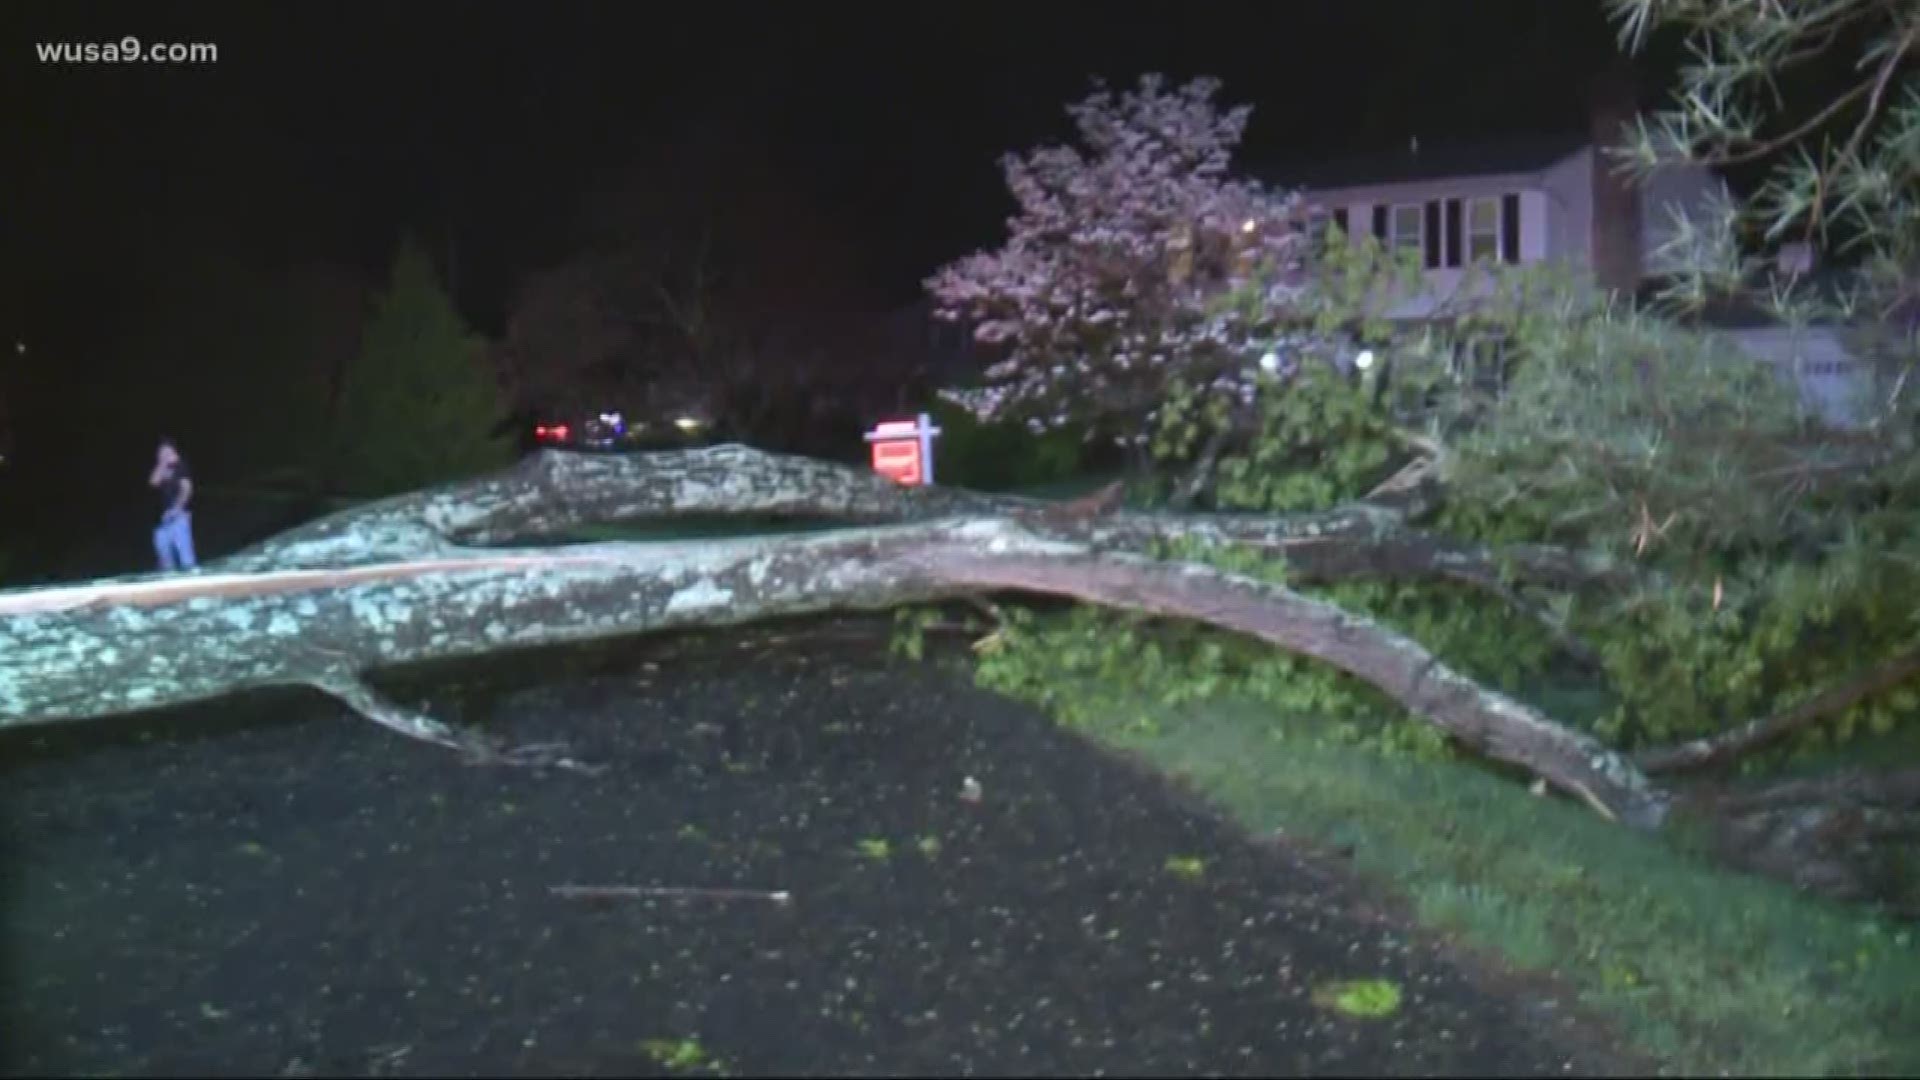 The National Weather Service confirmed a tornado touched down in Reston, Va. on Friday evening.